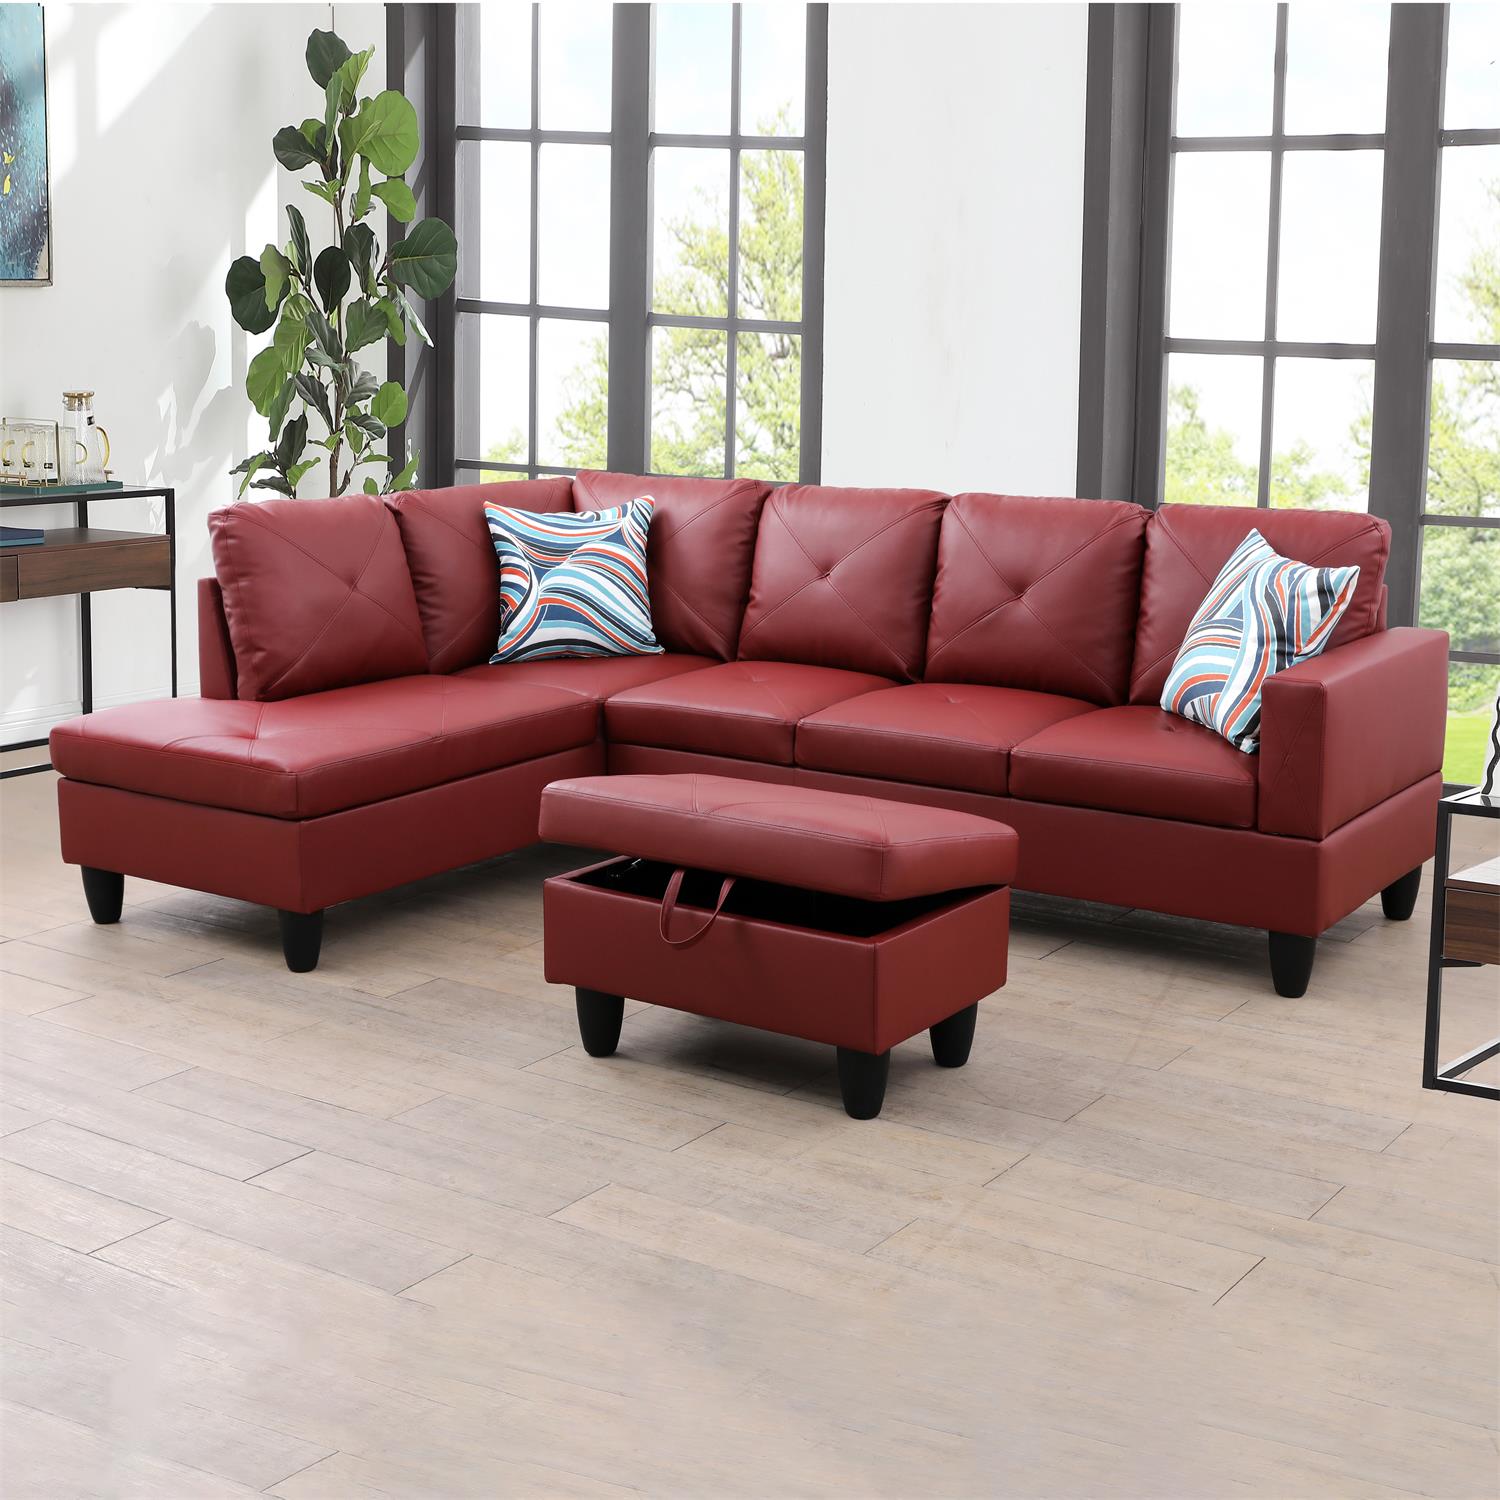 Ainehome Red L-Shaped Faux Leather Sofa Set